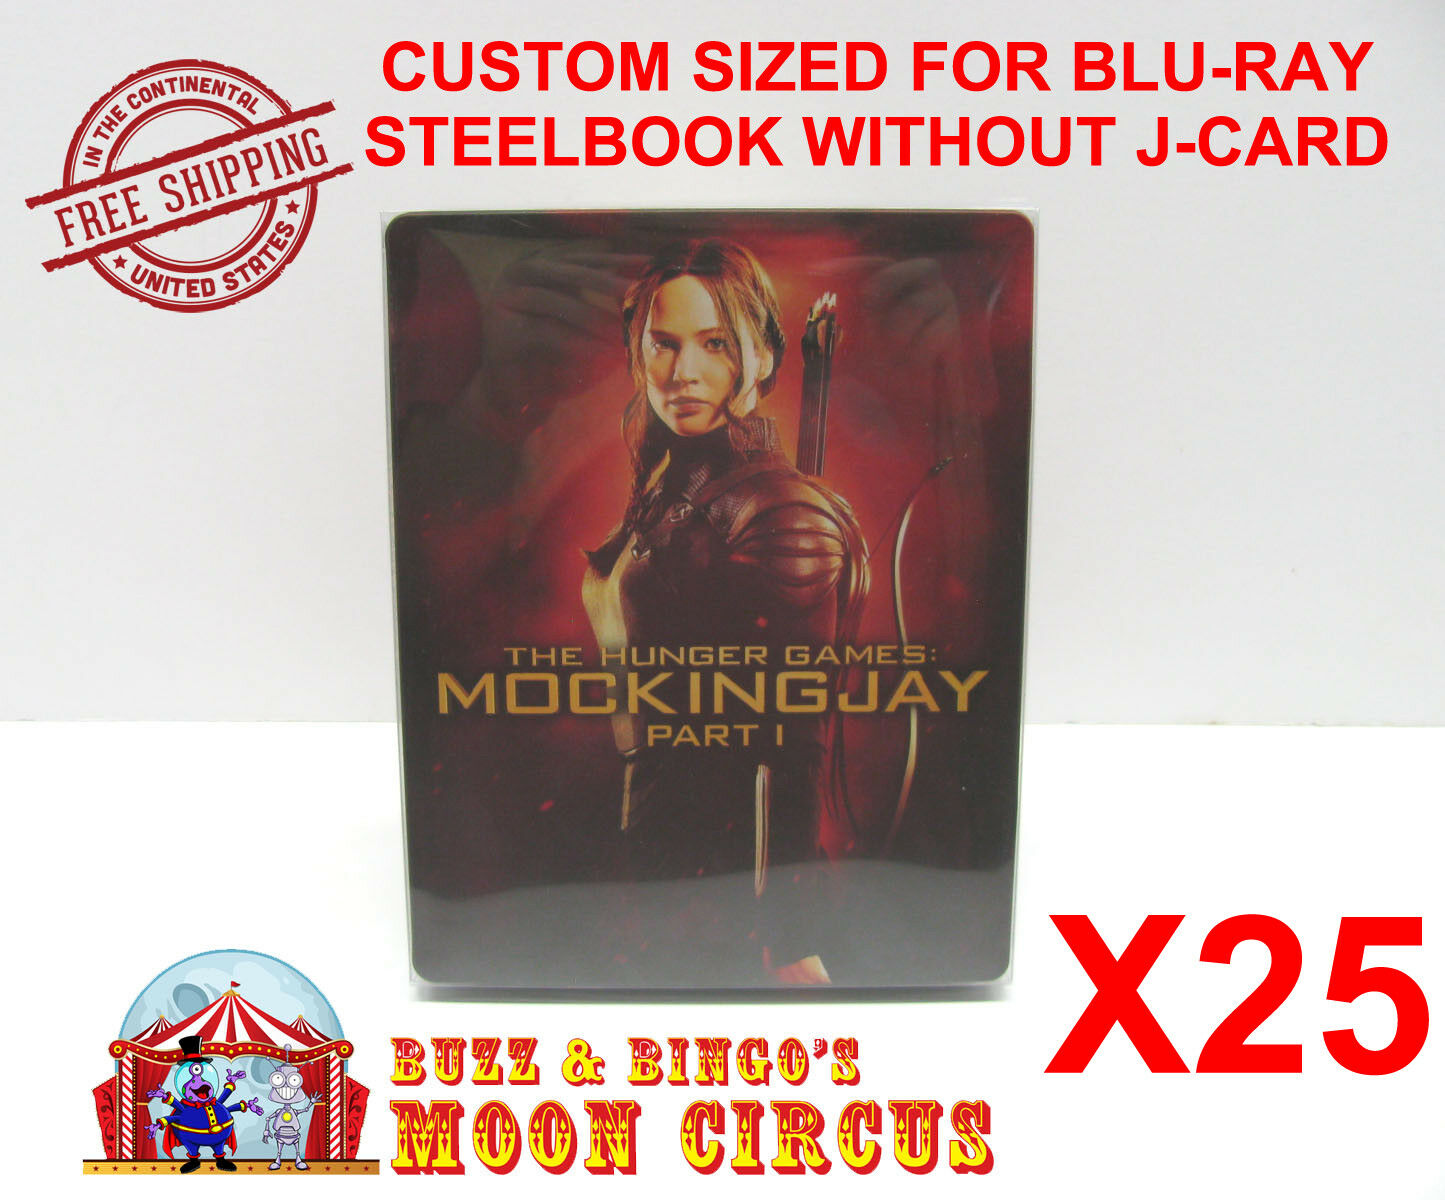 25x Blu-ray Steelbook Clear Protective Sleeve - Box Protectors - No J-card Size